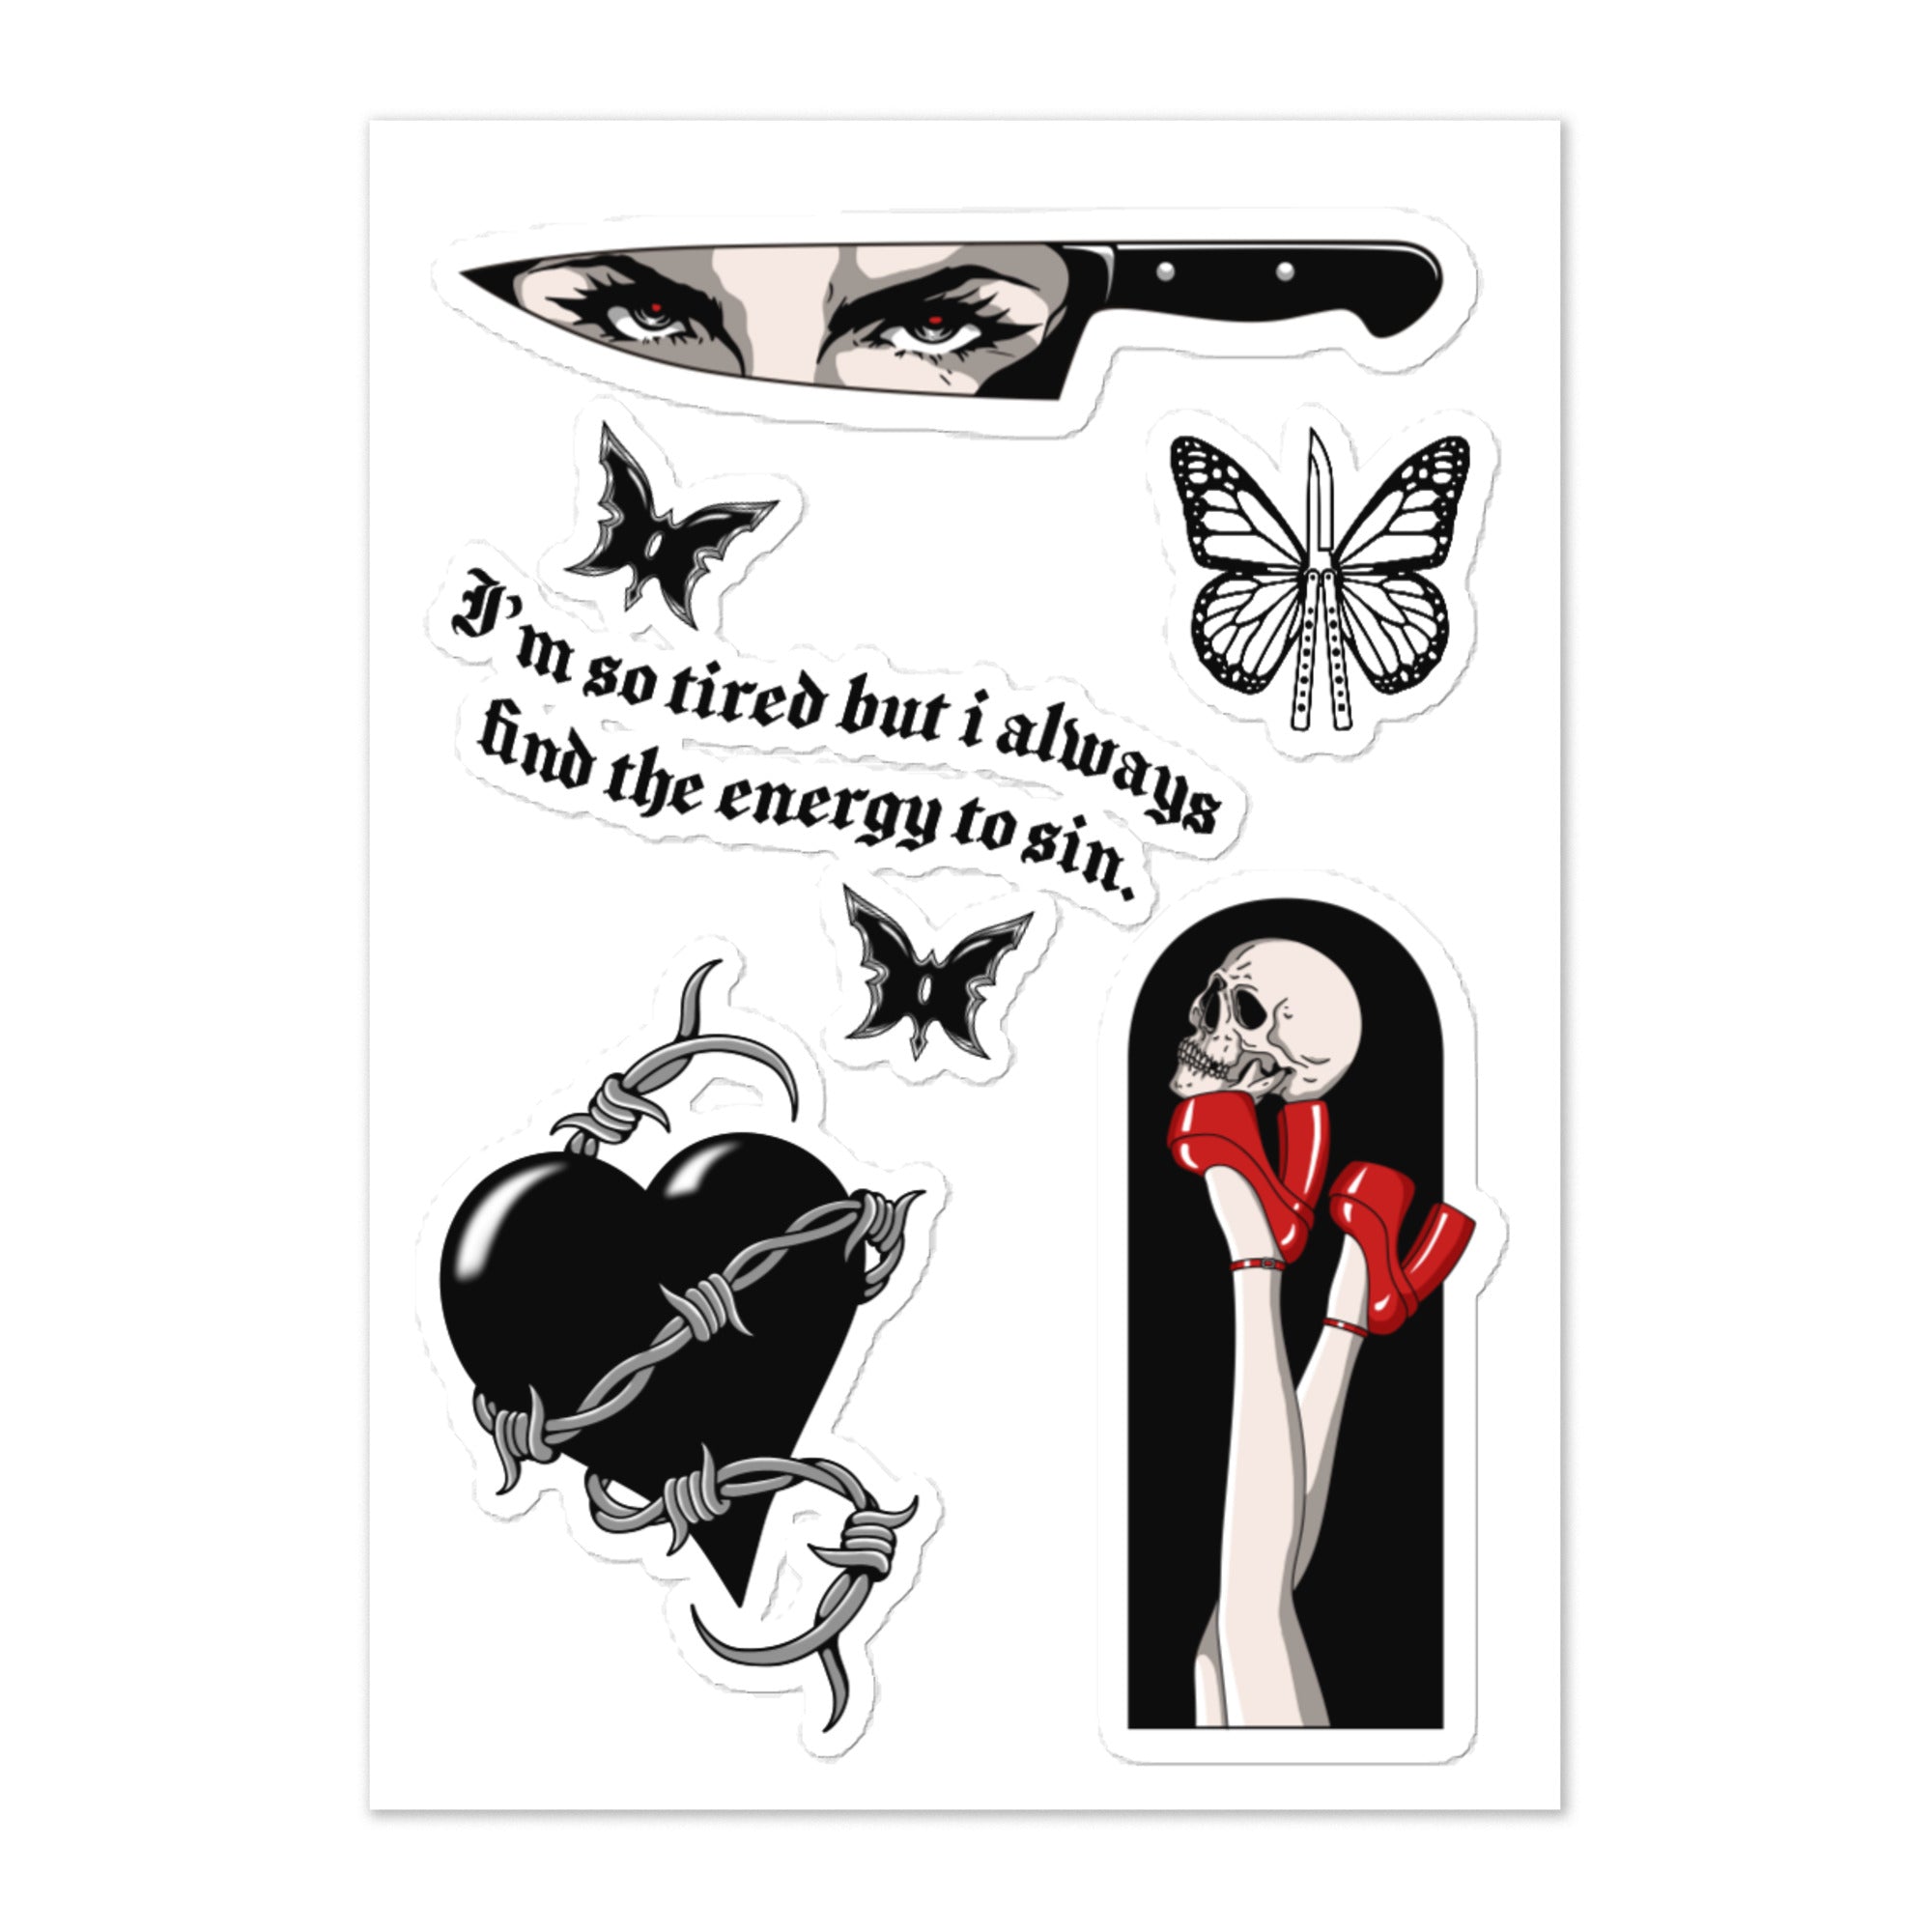 Blade Babe Sticker Sheet - Blades For Babes Default Title Accessory